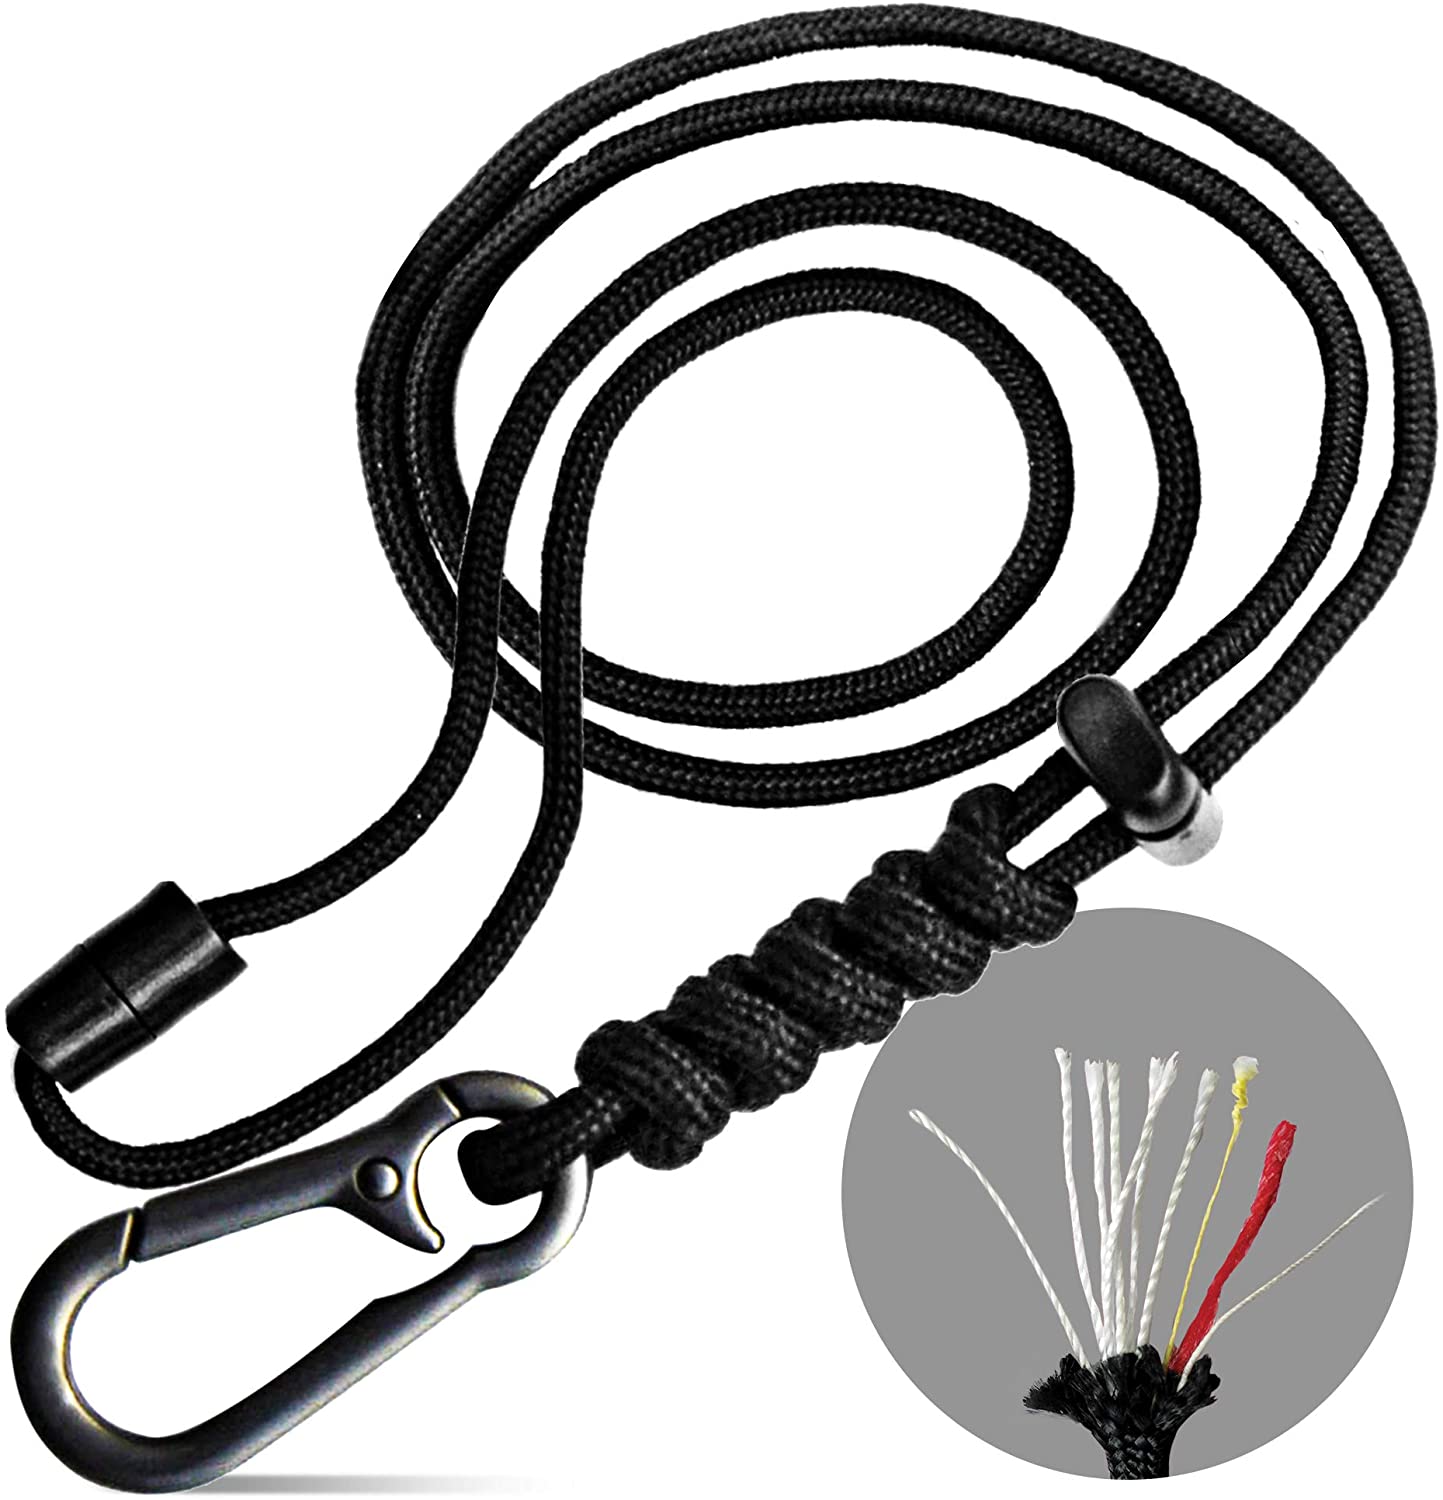 Survival + Fishing Paracord Lanyard  Free s & h for $150 orders –  Holtzman's Gorilla Survival